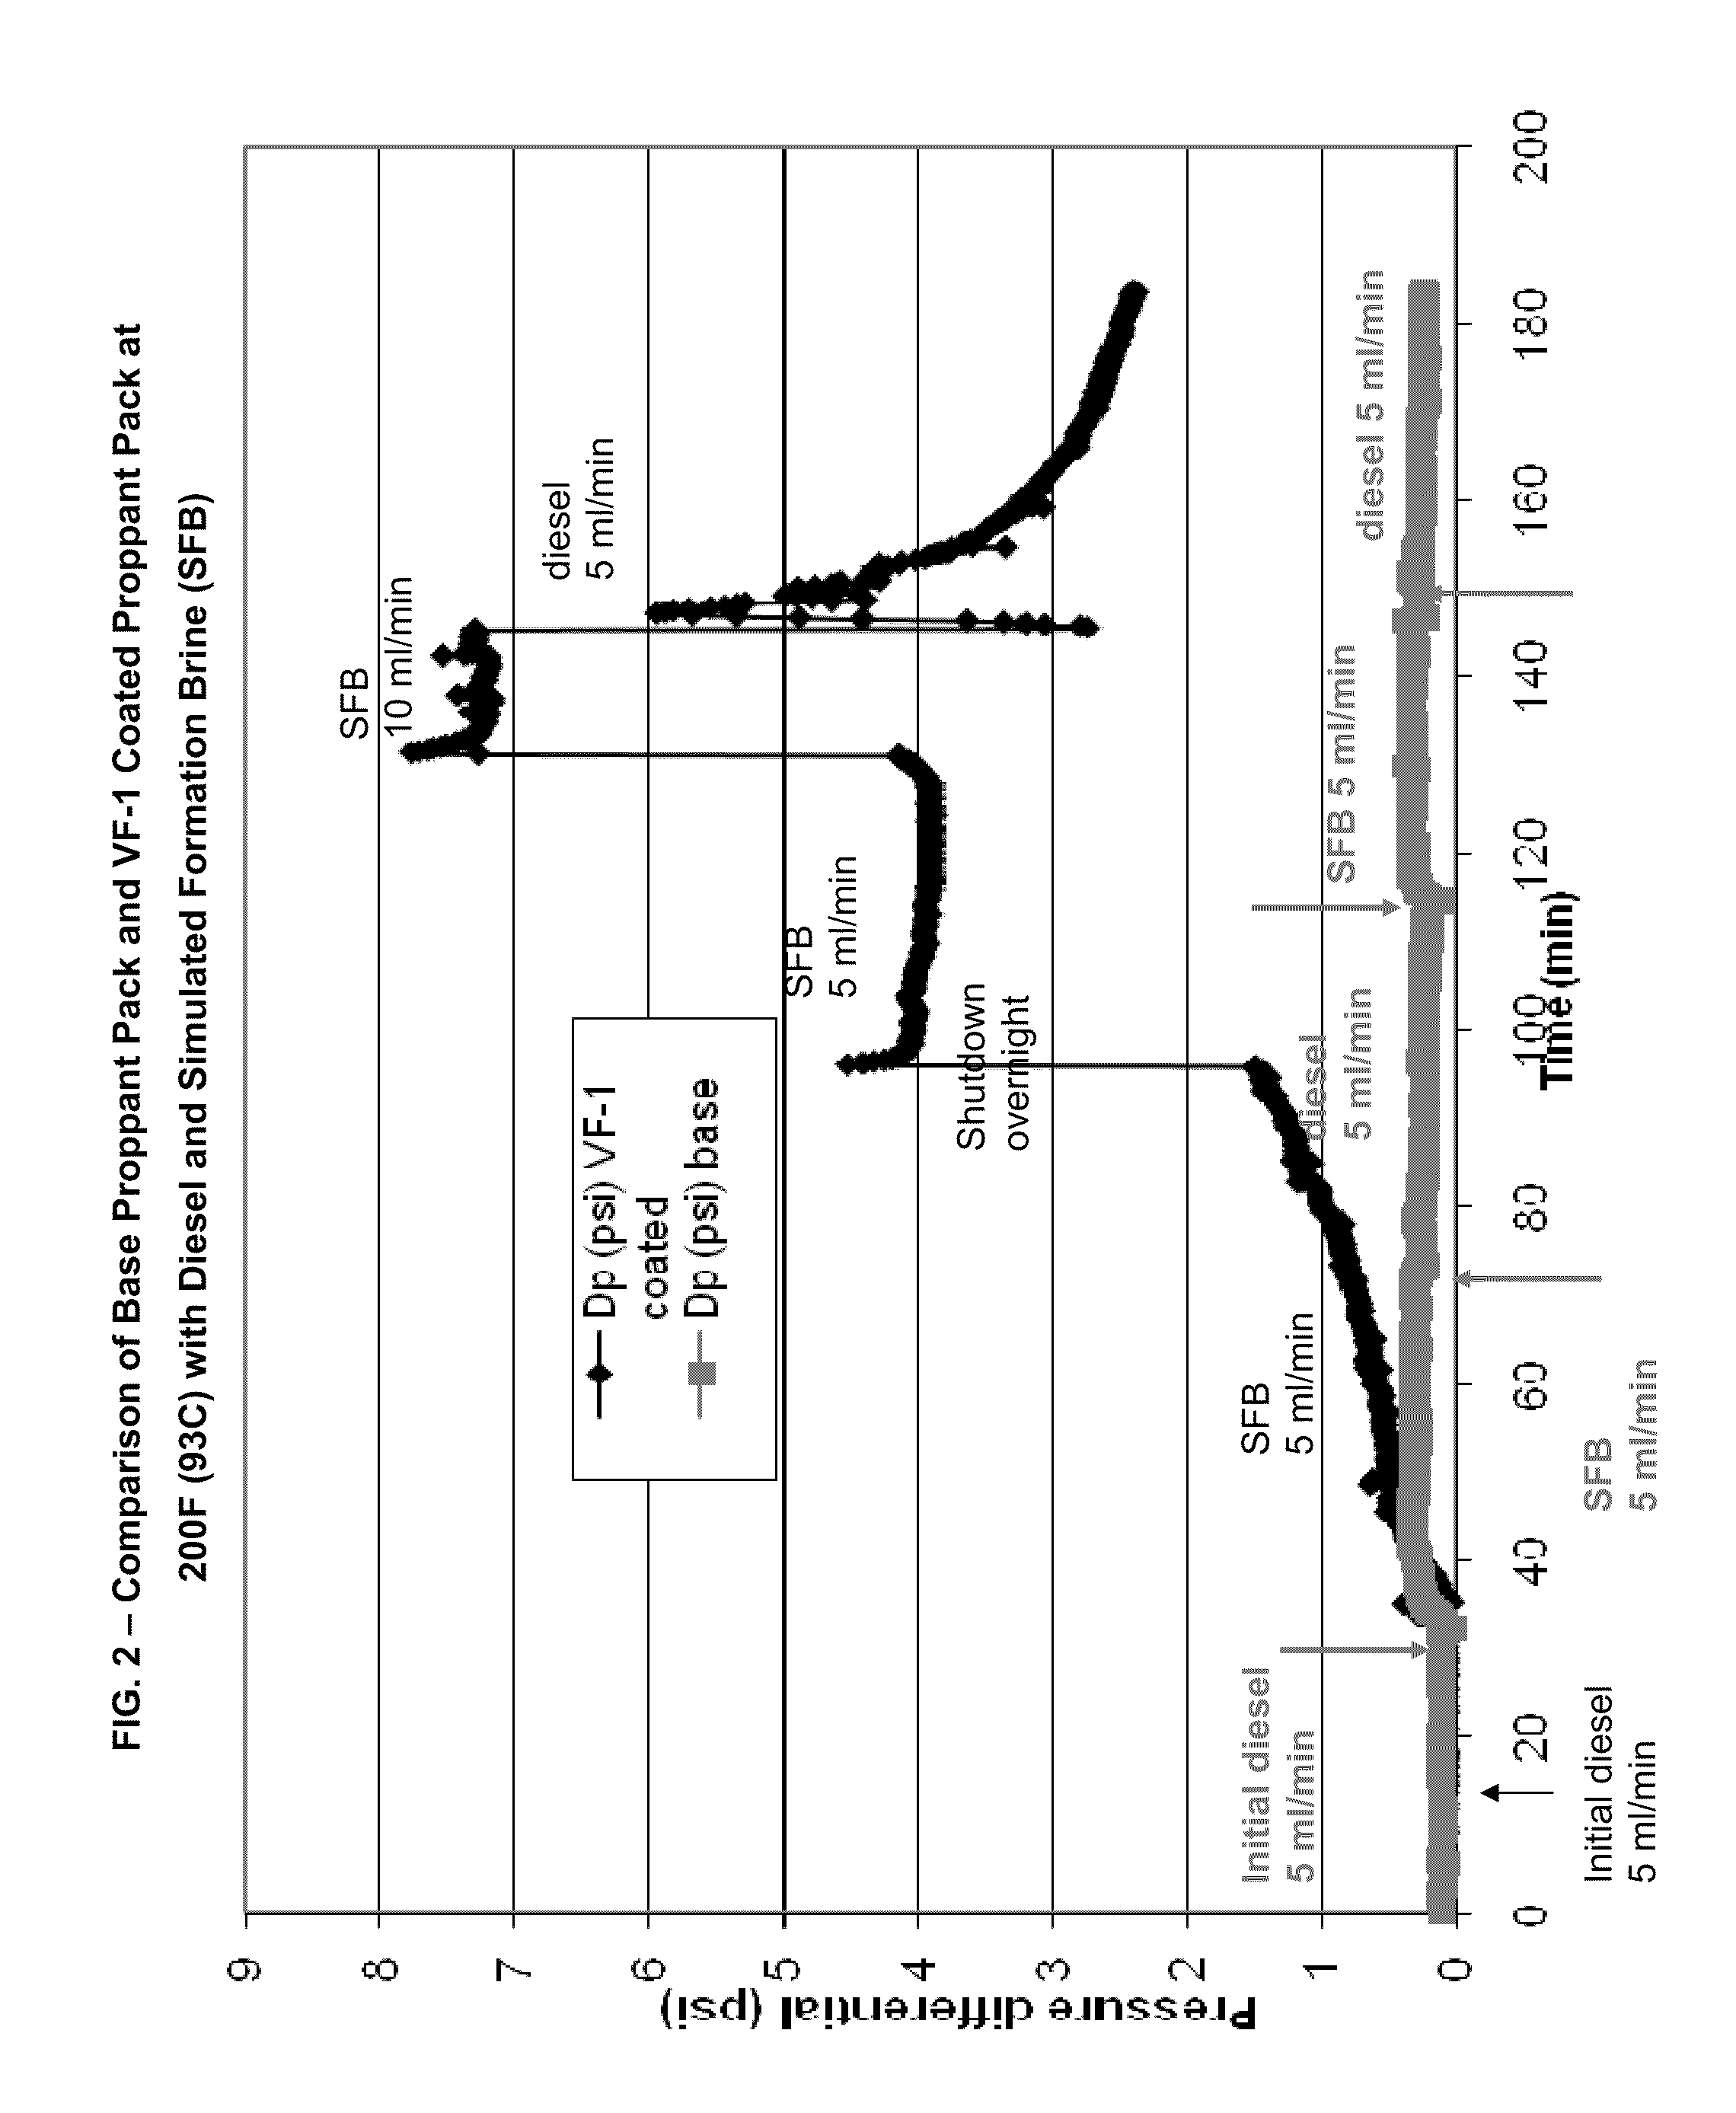 Method of Controlling Water Production Through Treating Proppants With RPMS